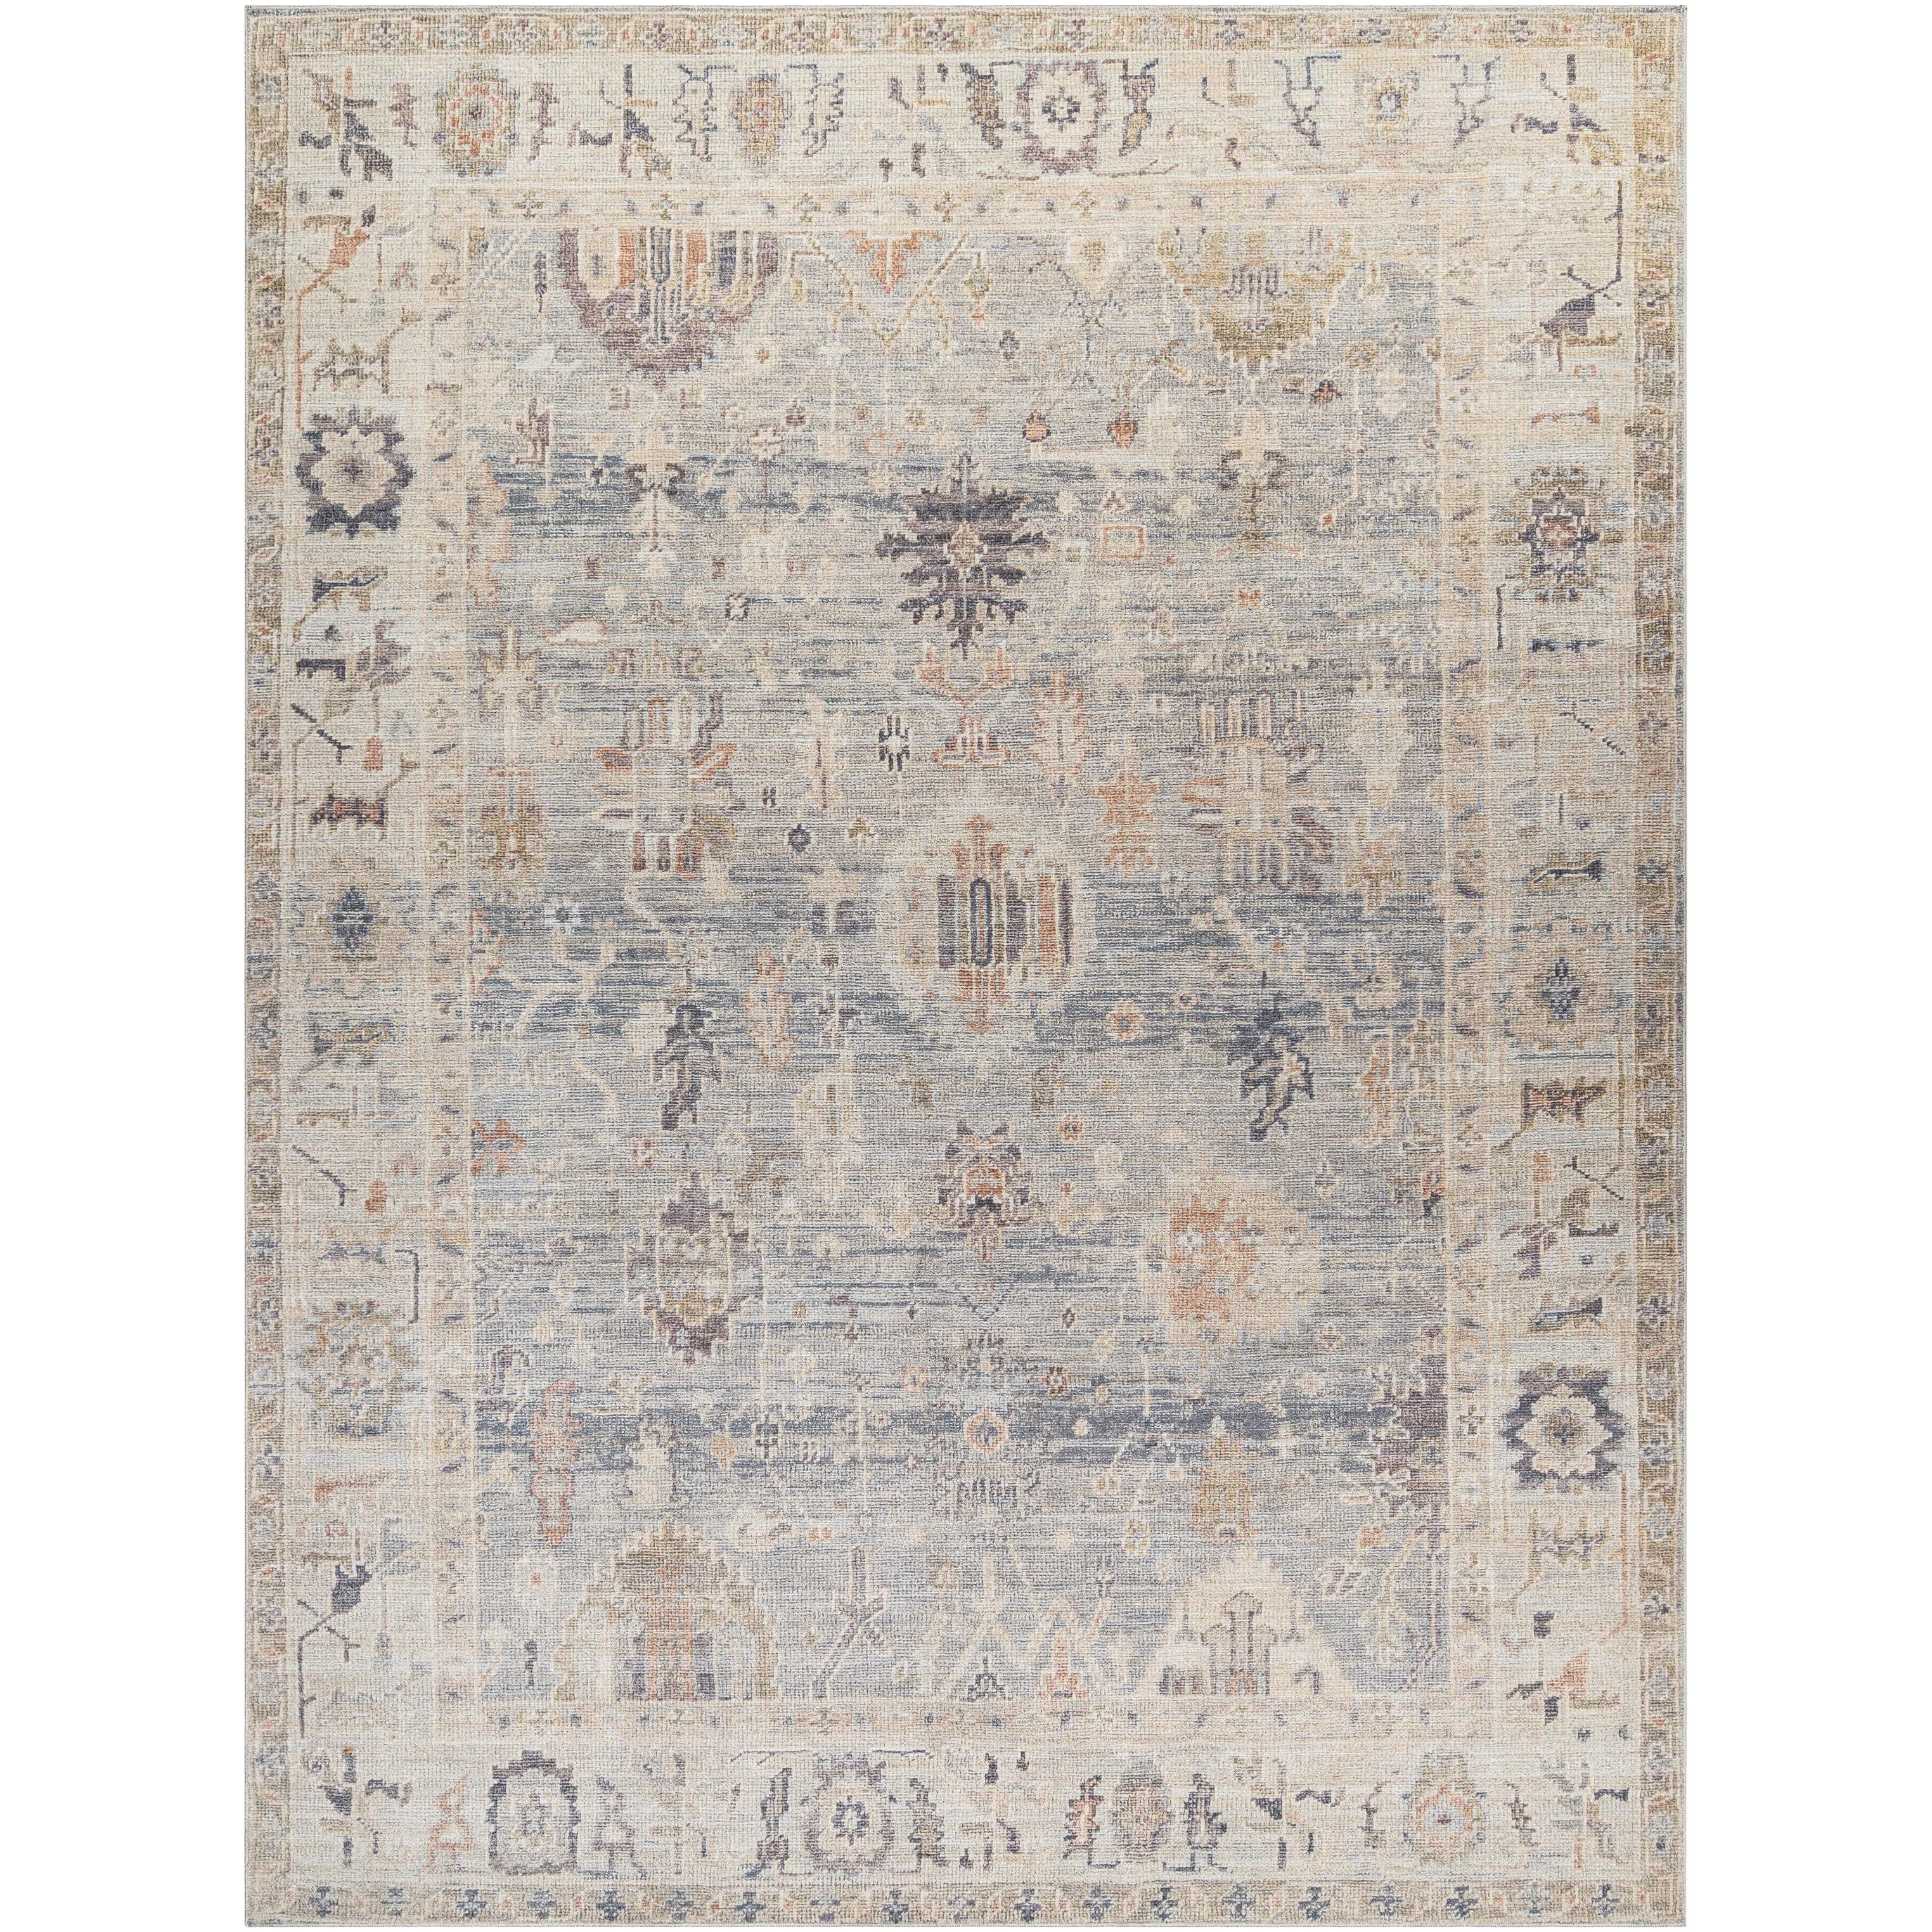 This exquisite Marlene area rug is the perfect addition to any living space. Designed in specifically for our Becki Owens x Surya line, this stunning piece features a vintage-inspired style that is sure to bring a touch of timeless elegance to your home. The polyester construction and medium pile make it durable and perfect for high traffic areas. Amethyst Home provides interior design, new home construction design consulting, vintage area rugs, and lighting in the Scottsdale metro area.